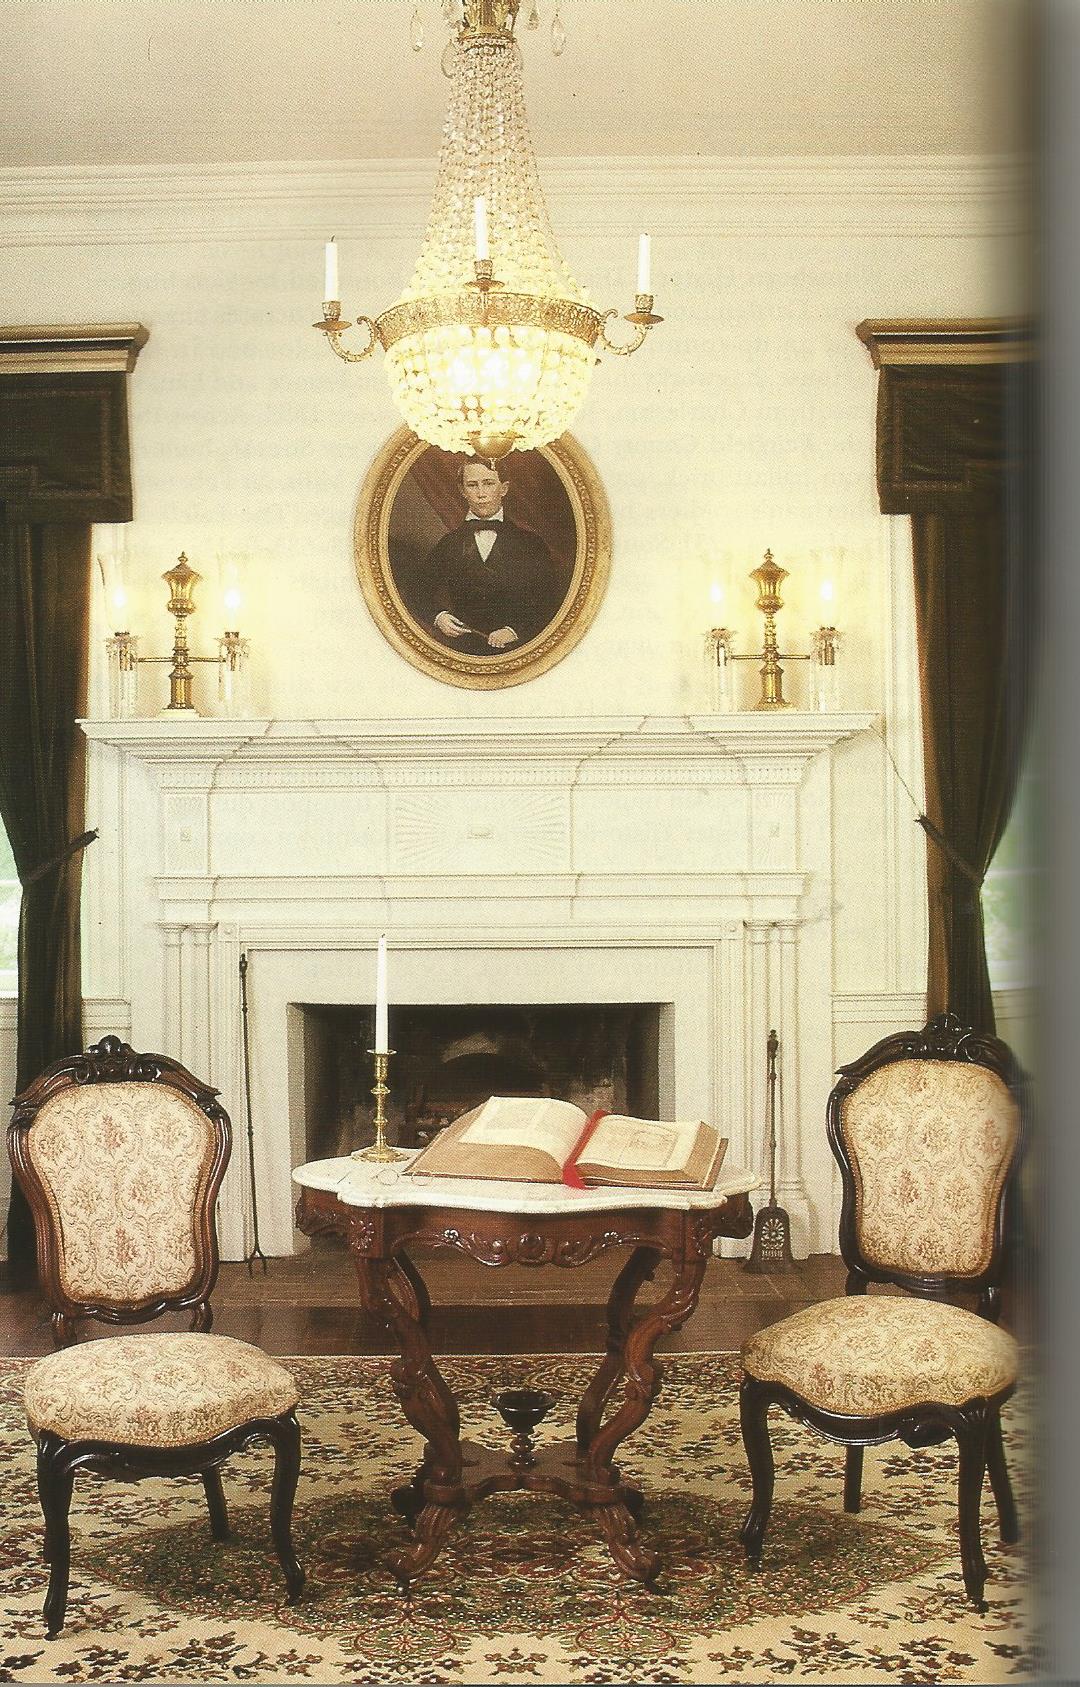 Parlor in Rose Hill Plantation